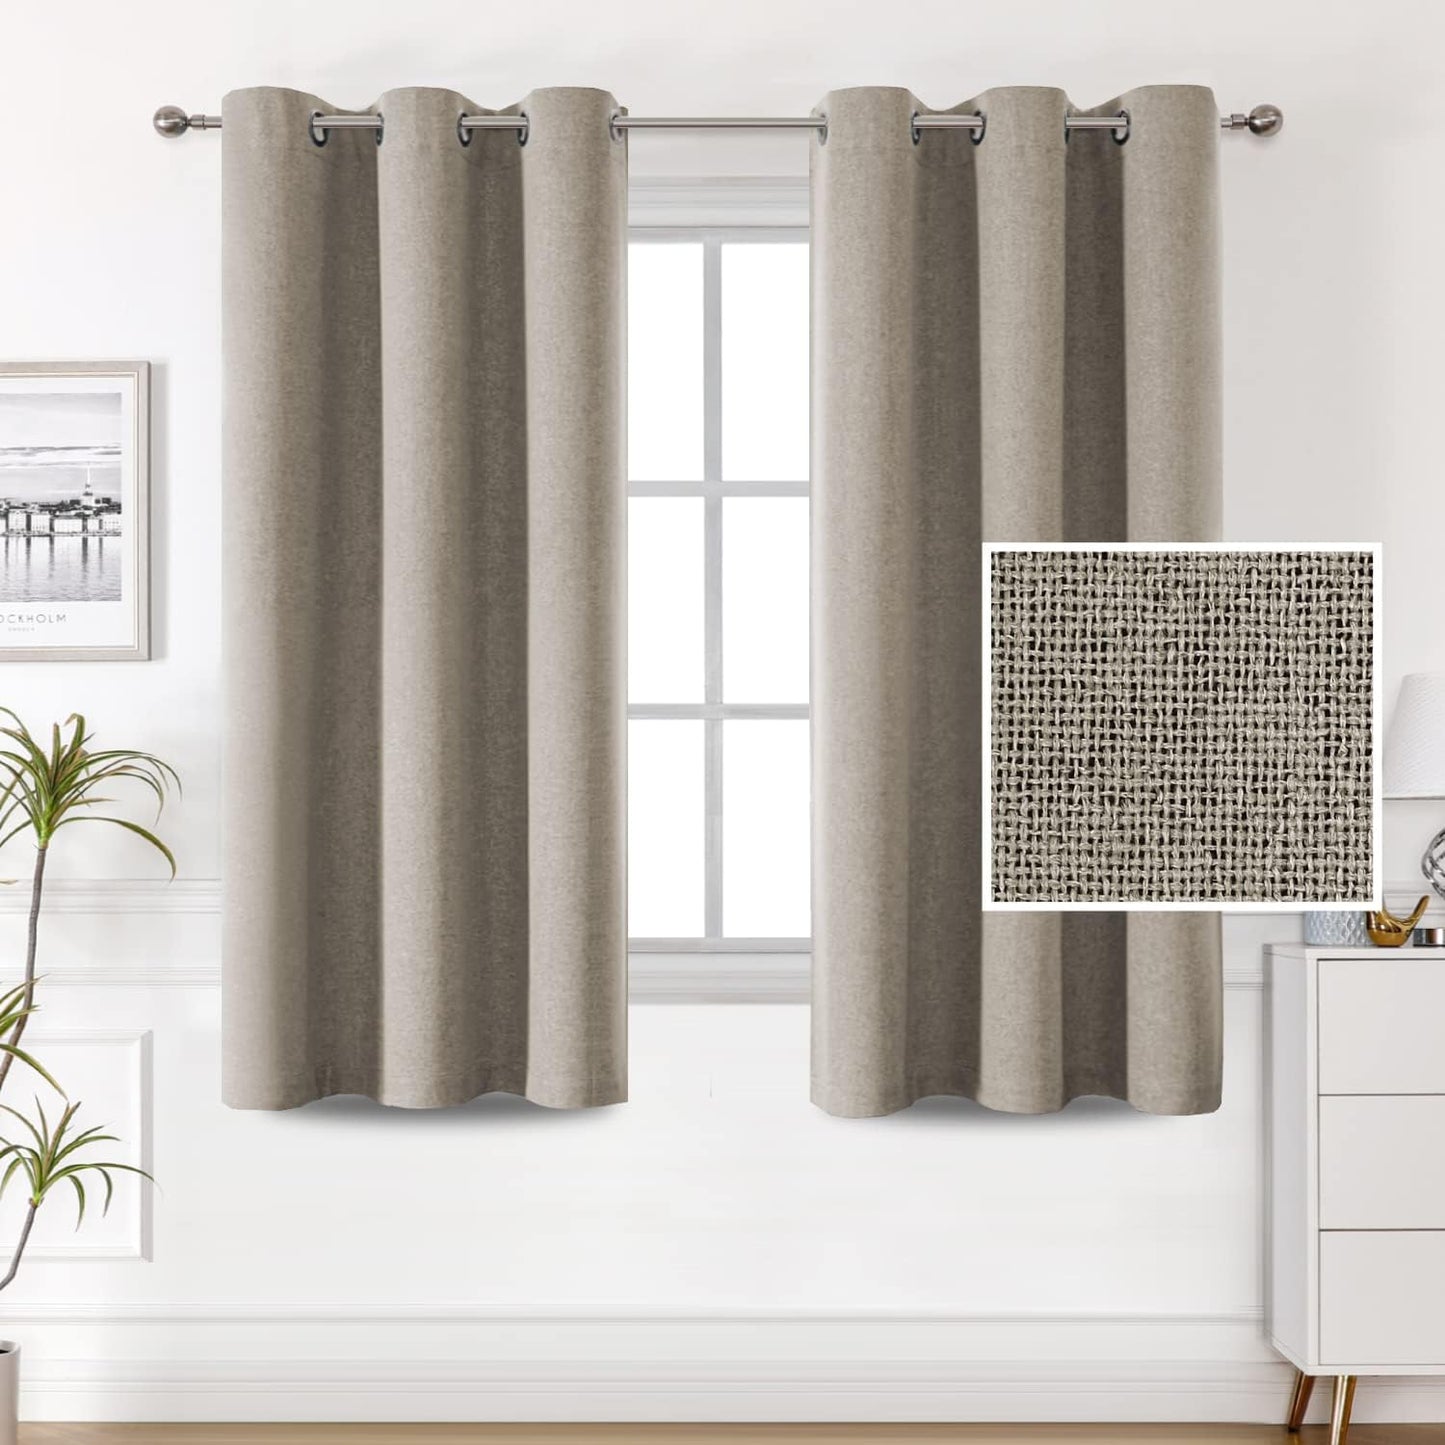 H.VERSAILTEX 100% Blackout Linen Look Curtains Thermal Insulated Curtains for Living Room Textured Burlap Drapes for Bedroom Grommet Linen Noise Blocking Curtains 42 X 84 Inch, 2 Panels - Sage  H.VERSAILTEX Taupe 42"W X 63"L 